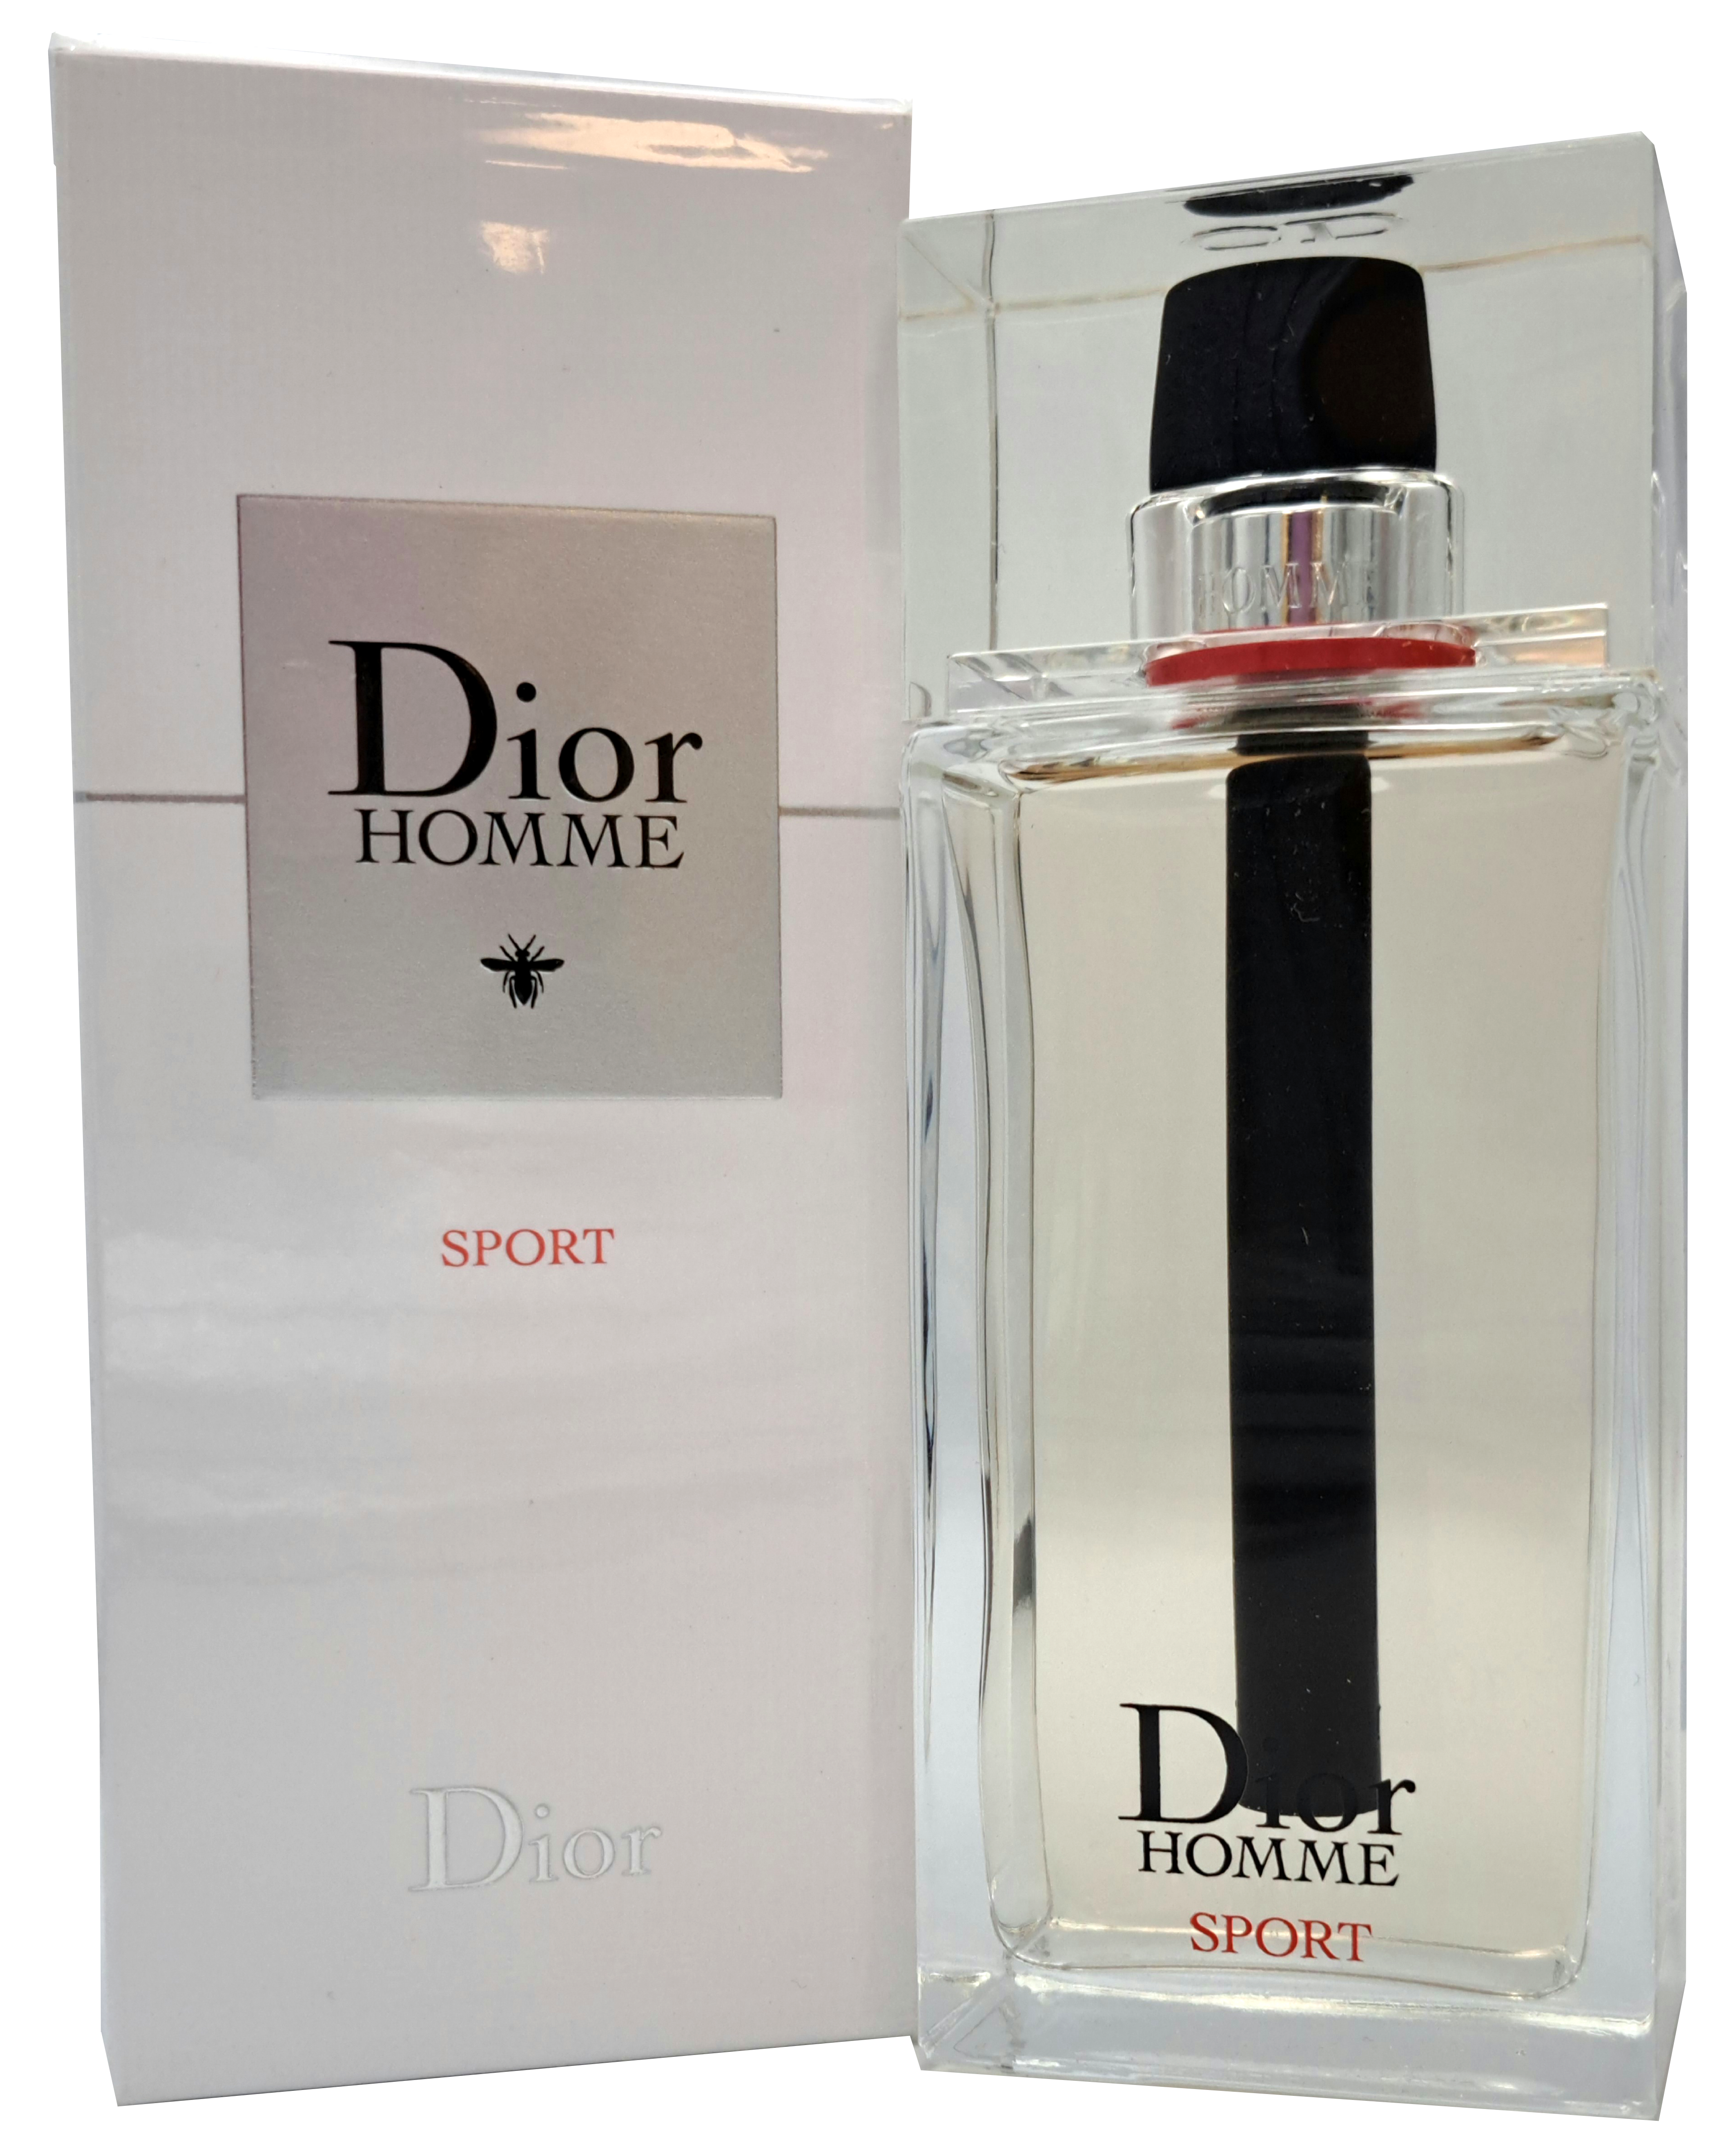 Dior Homme Cologne (2013) by Christian Dior – Basenotes